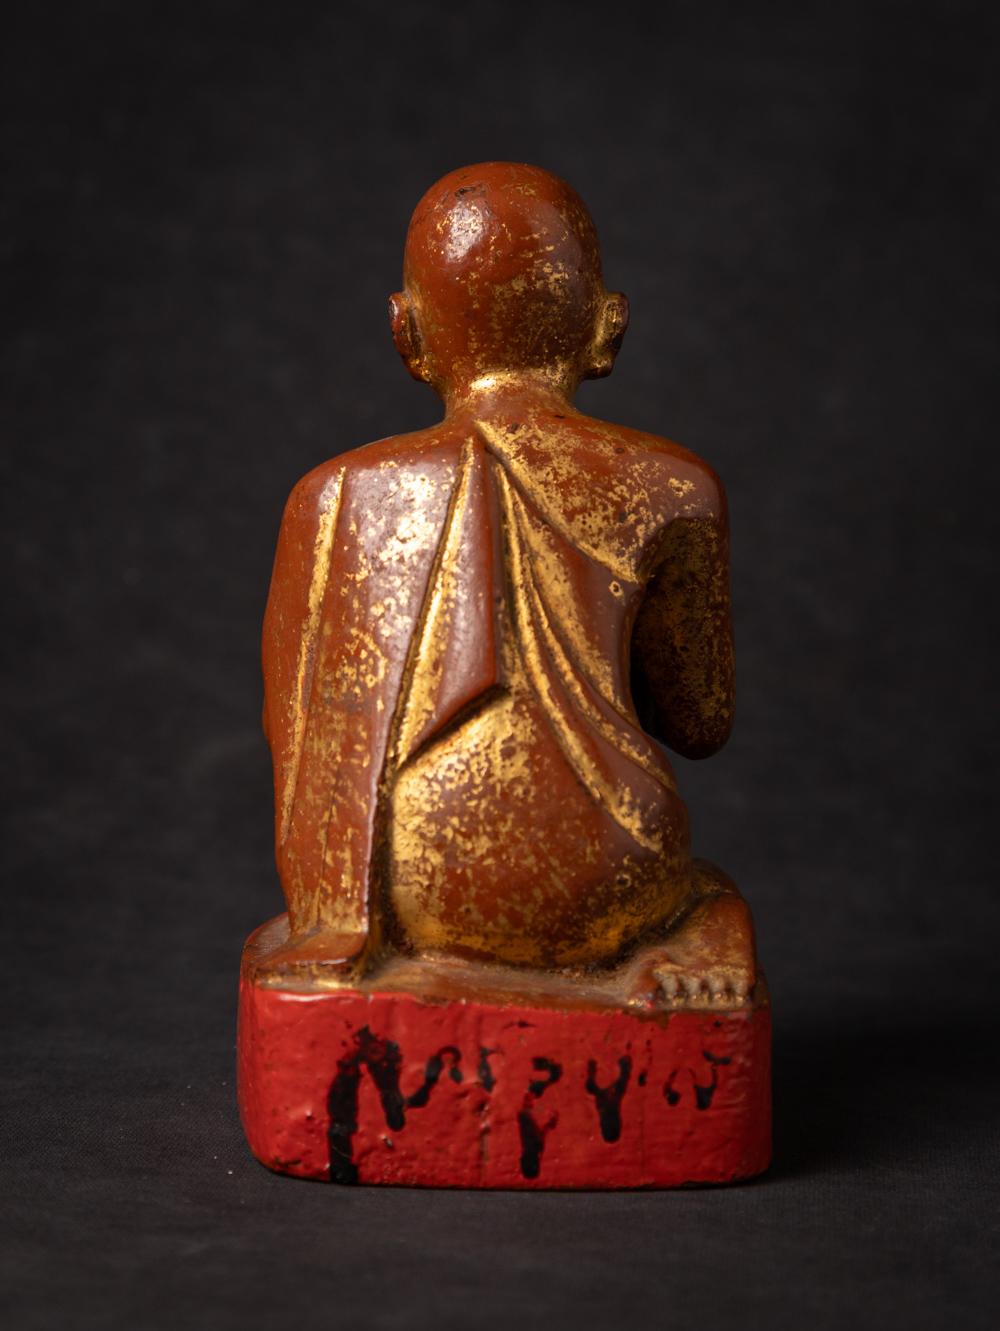 This antique bronze Buddha statue is a truly unique and special collectible piece. Standing at 17.7 cm high, 9.7 cm wide, and 11.6 cm deep, it is made of Wood and it is in Mandalay style, depicting the Namaskara mudra. This statue is believed to